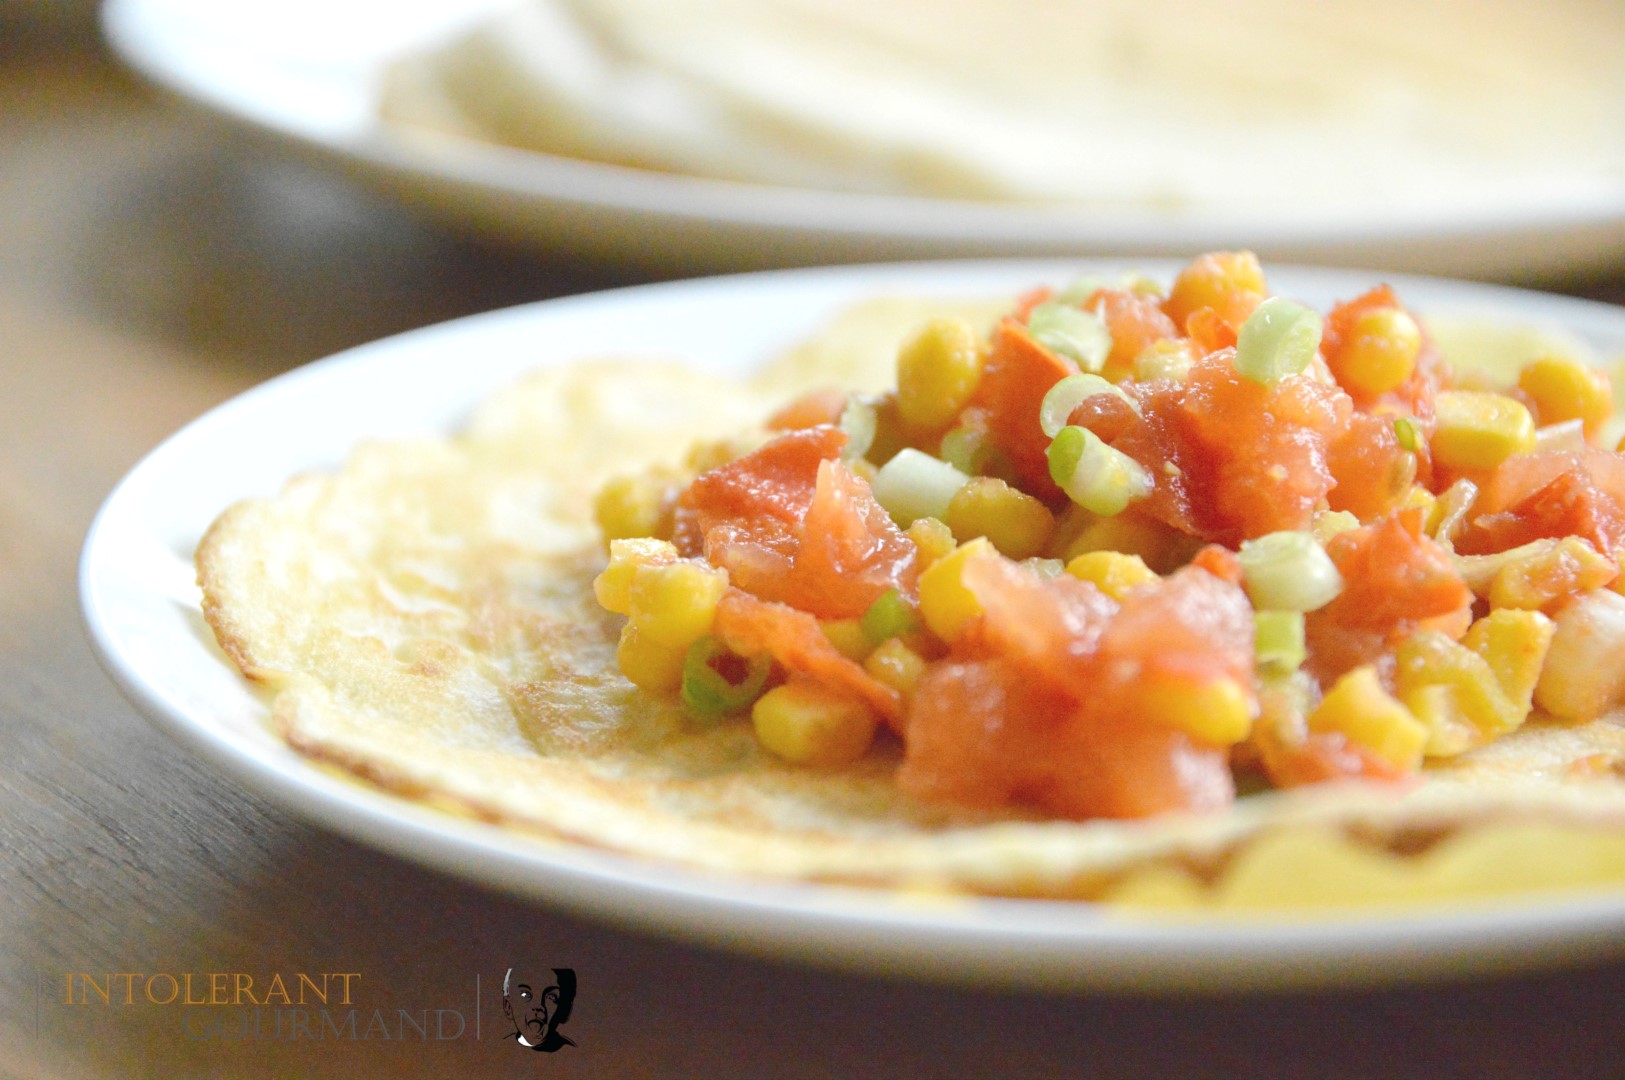 Sweetcorn spring onion tomato pancakes - dairy-free, wheat-free, gluten-free, egg-free and delicious! www.intolerantgourmand.com